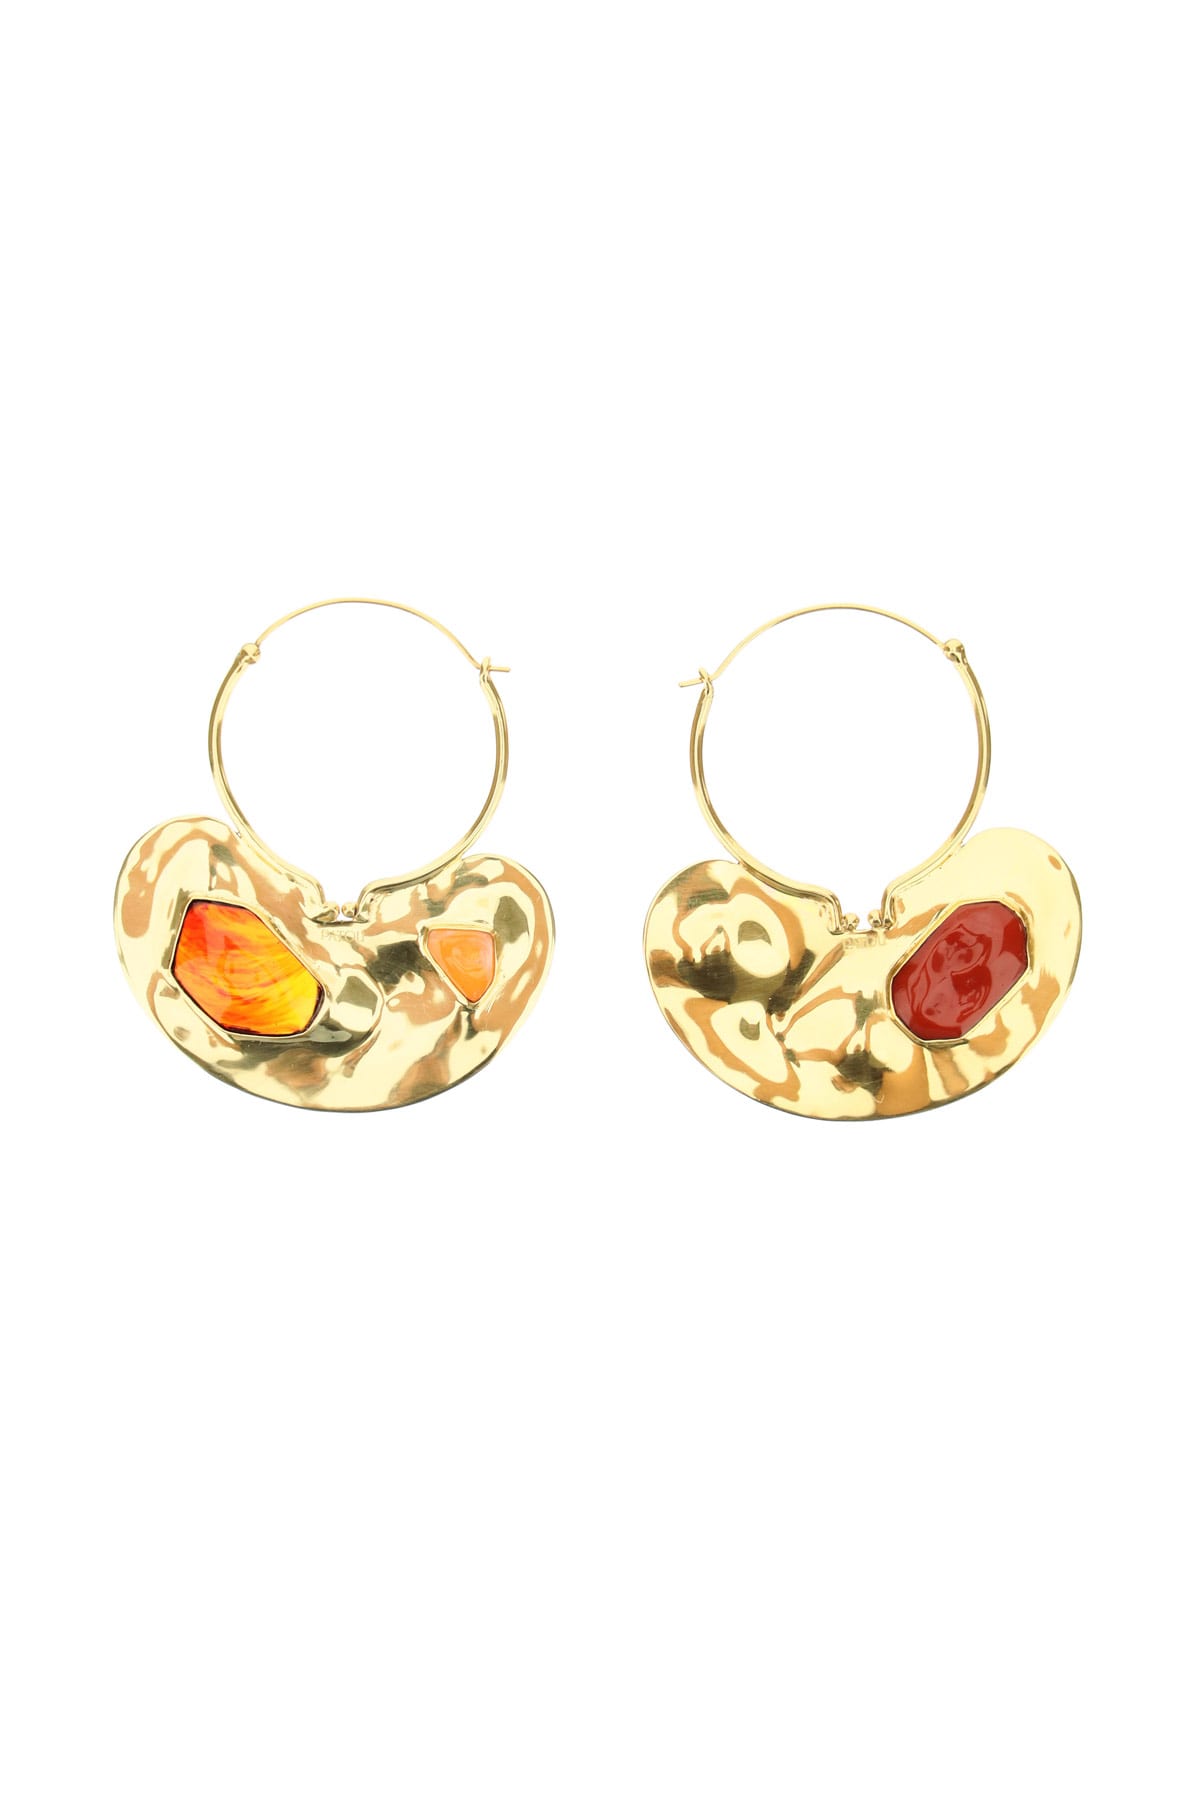 Patou Iconic Small Hoop Earrings With Stones